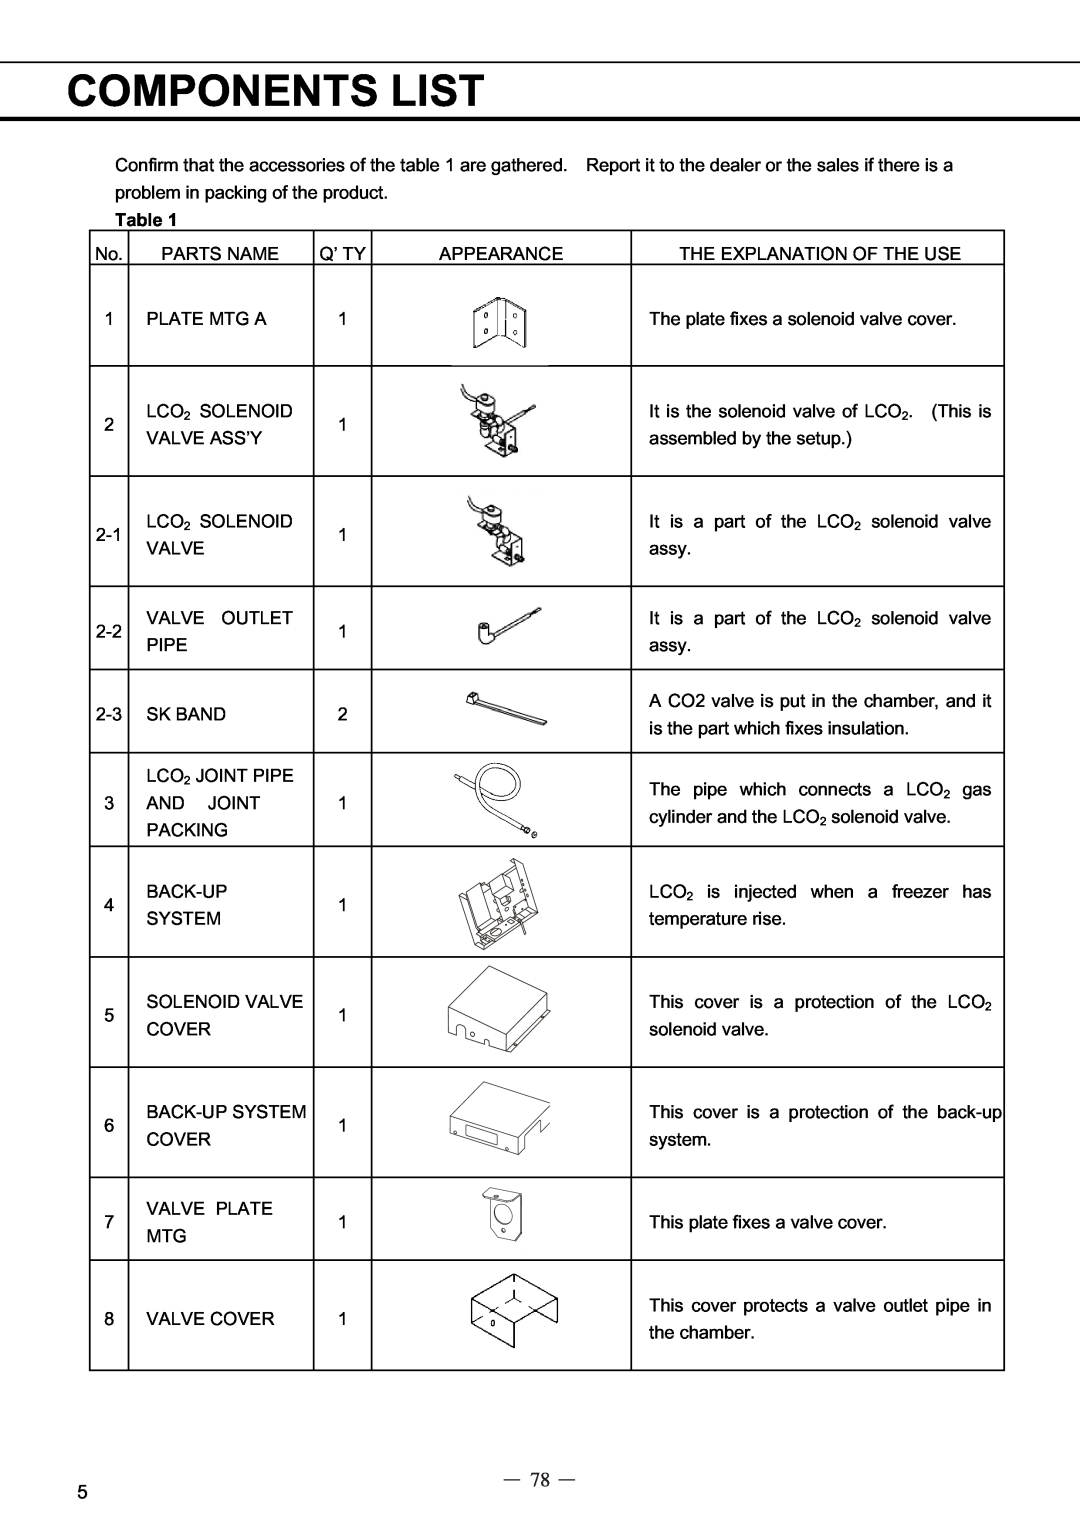 Sanyo MDF-C8V service manual Components List, Table 